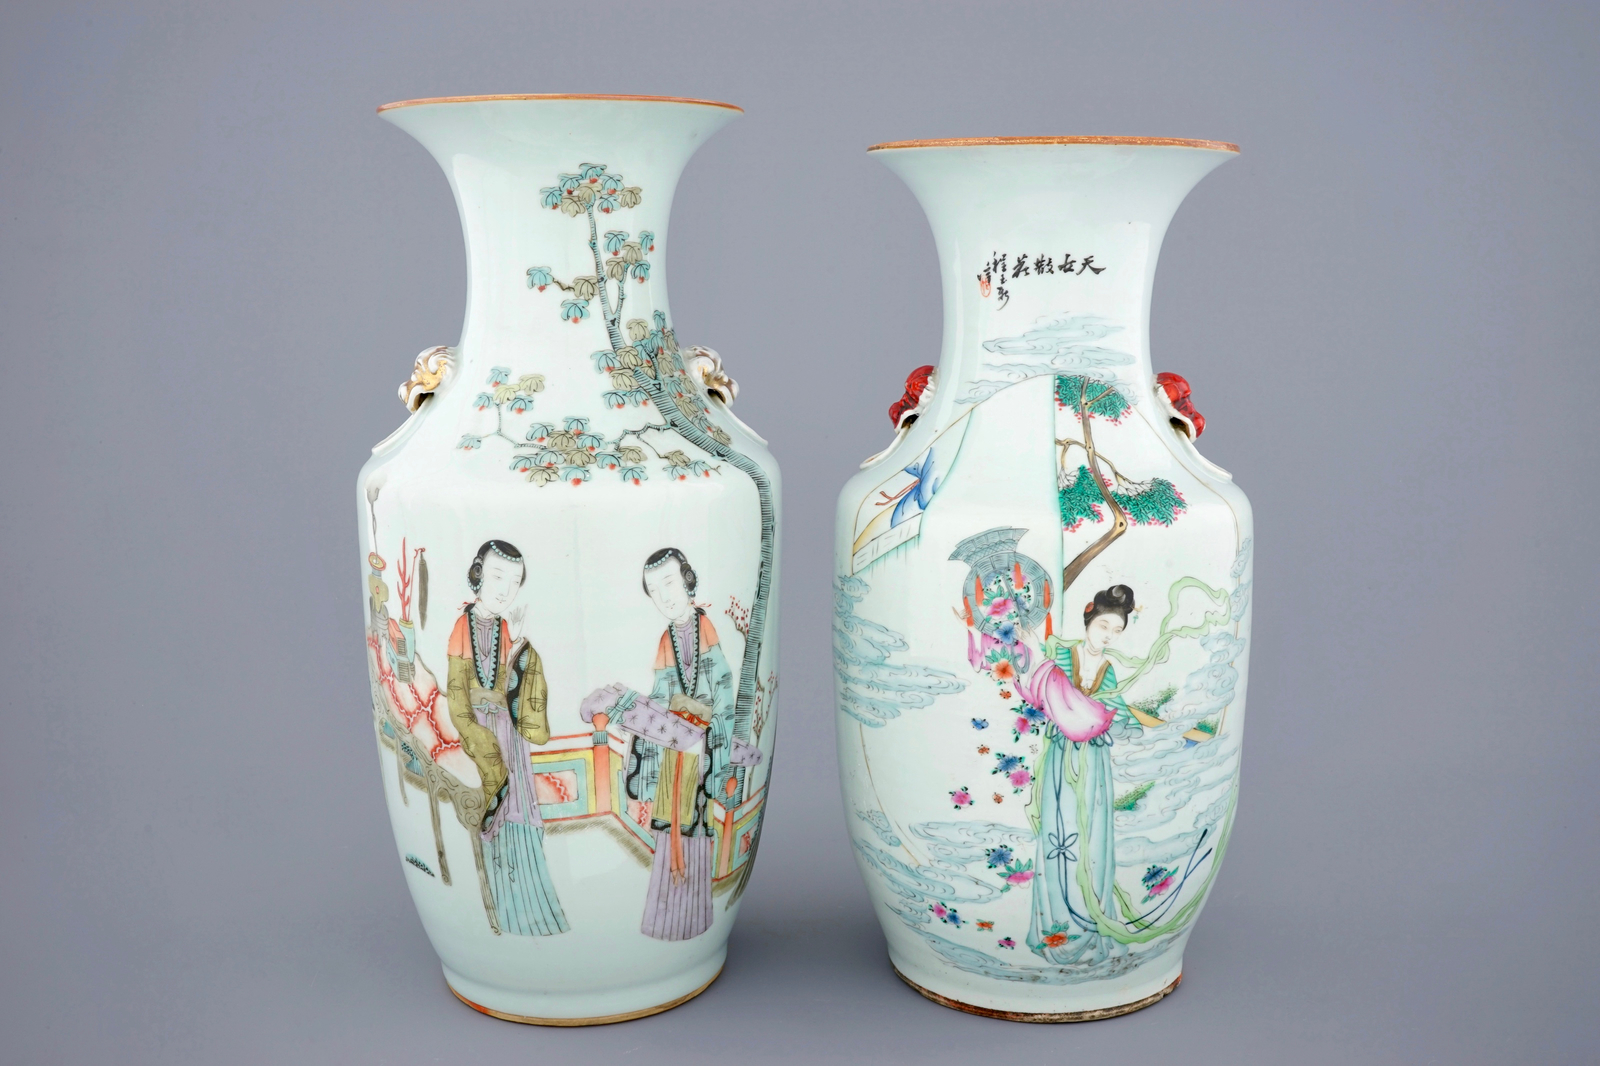 Two Chinese famille rose and qianjiang cai vases, 19/20th C. H.: 43,5 (the tallest) Condition